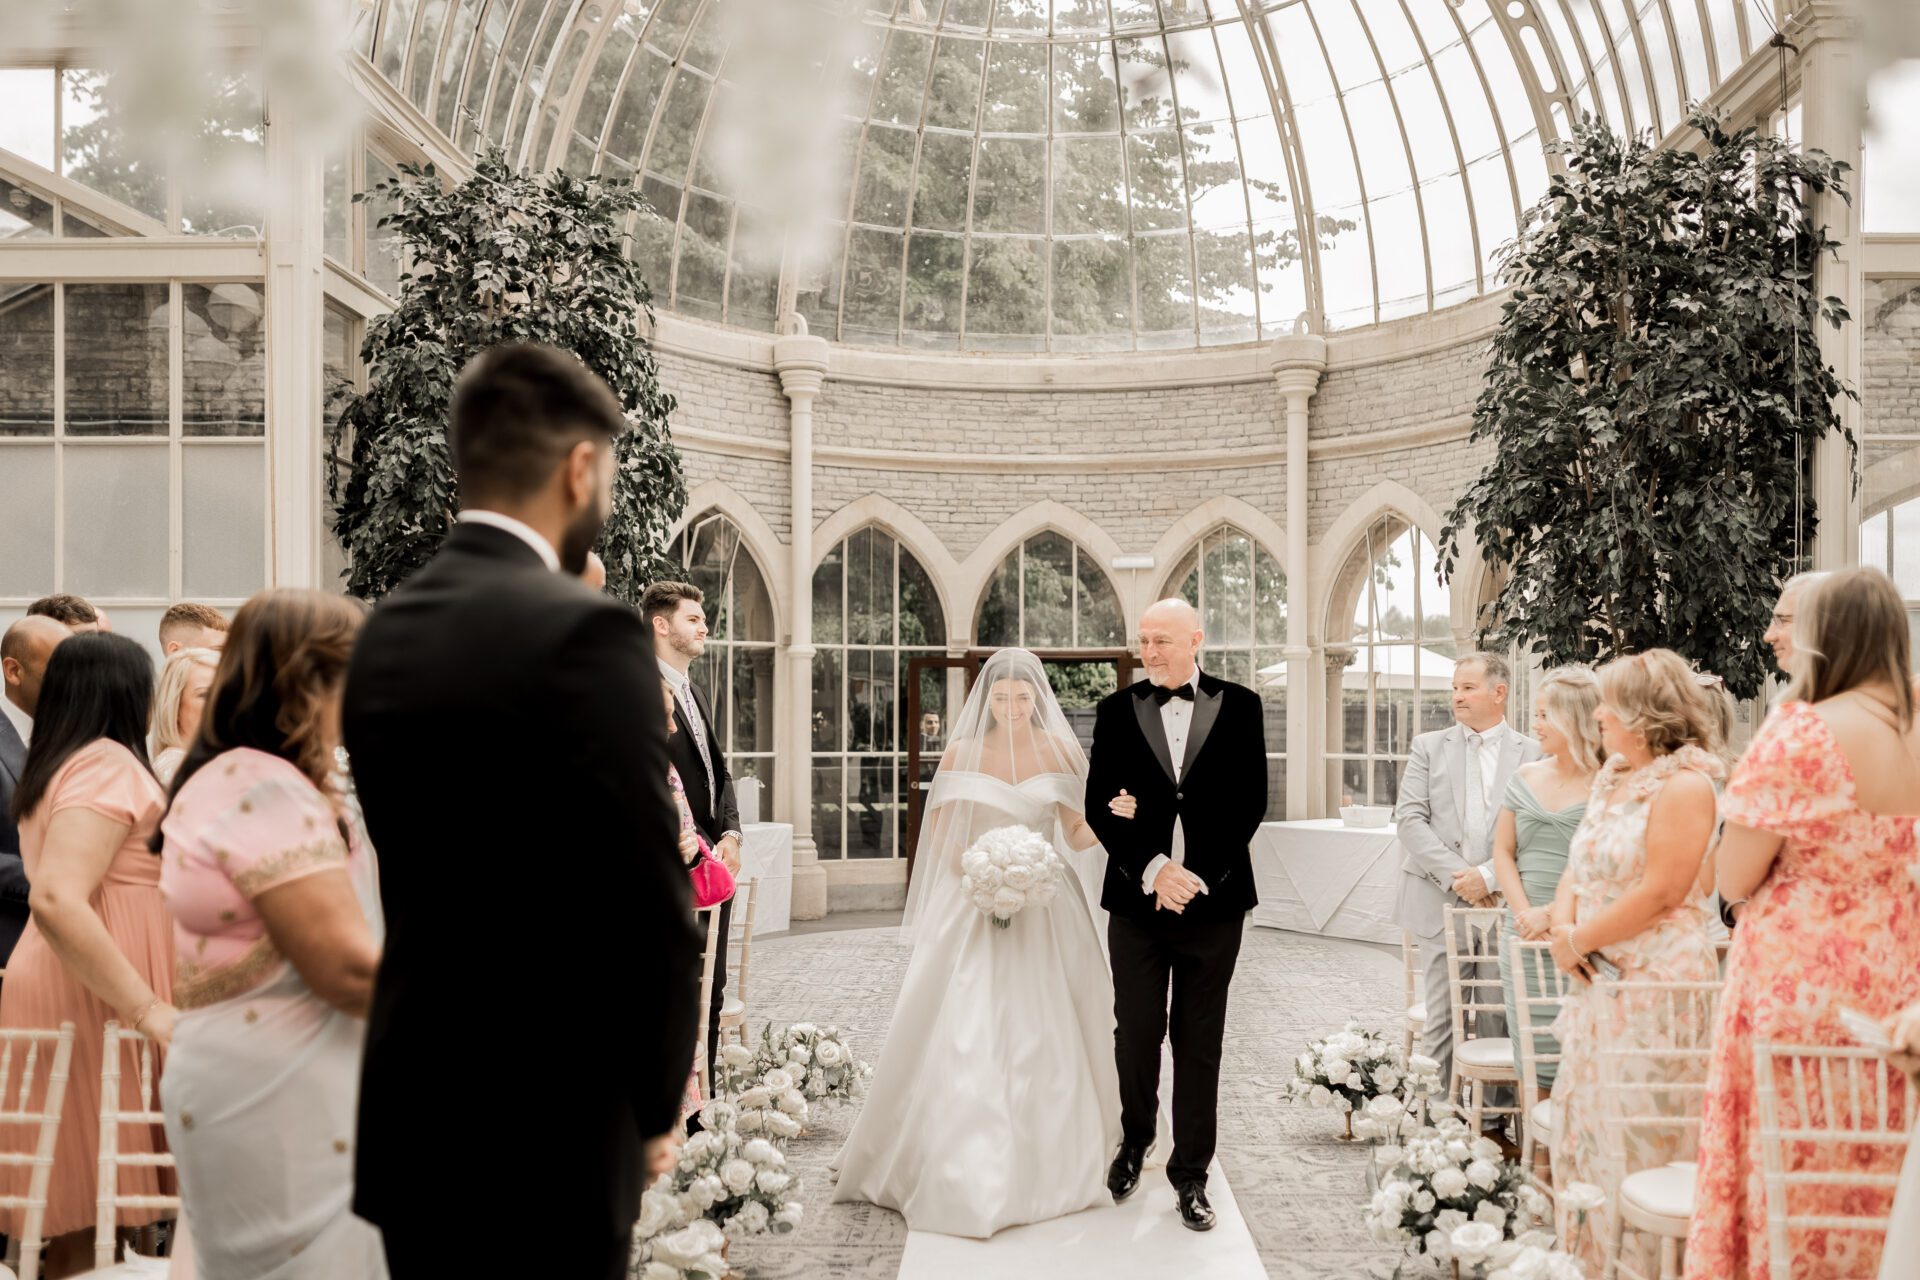 The bride and her father make their way down the aisle for the wedding ceremony in the Orangery at Tortworth Court